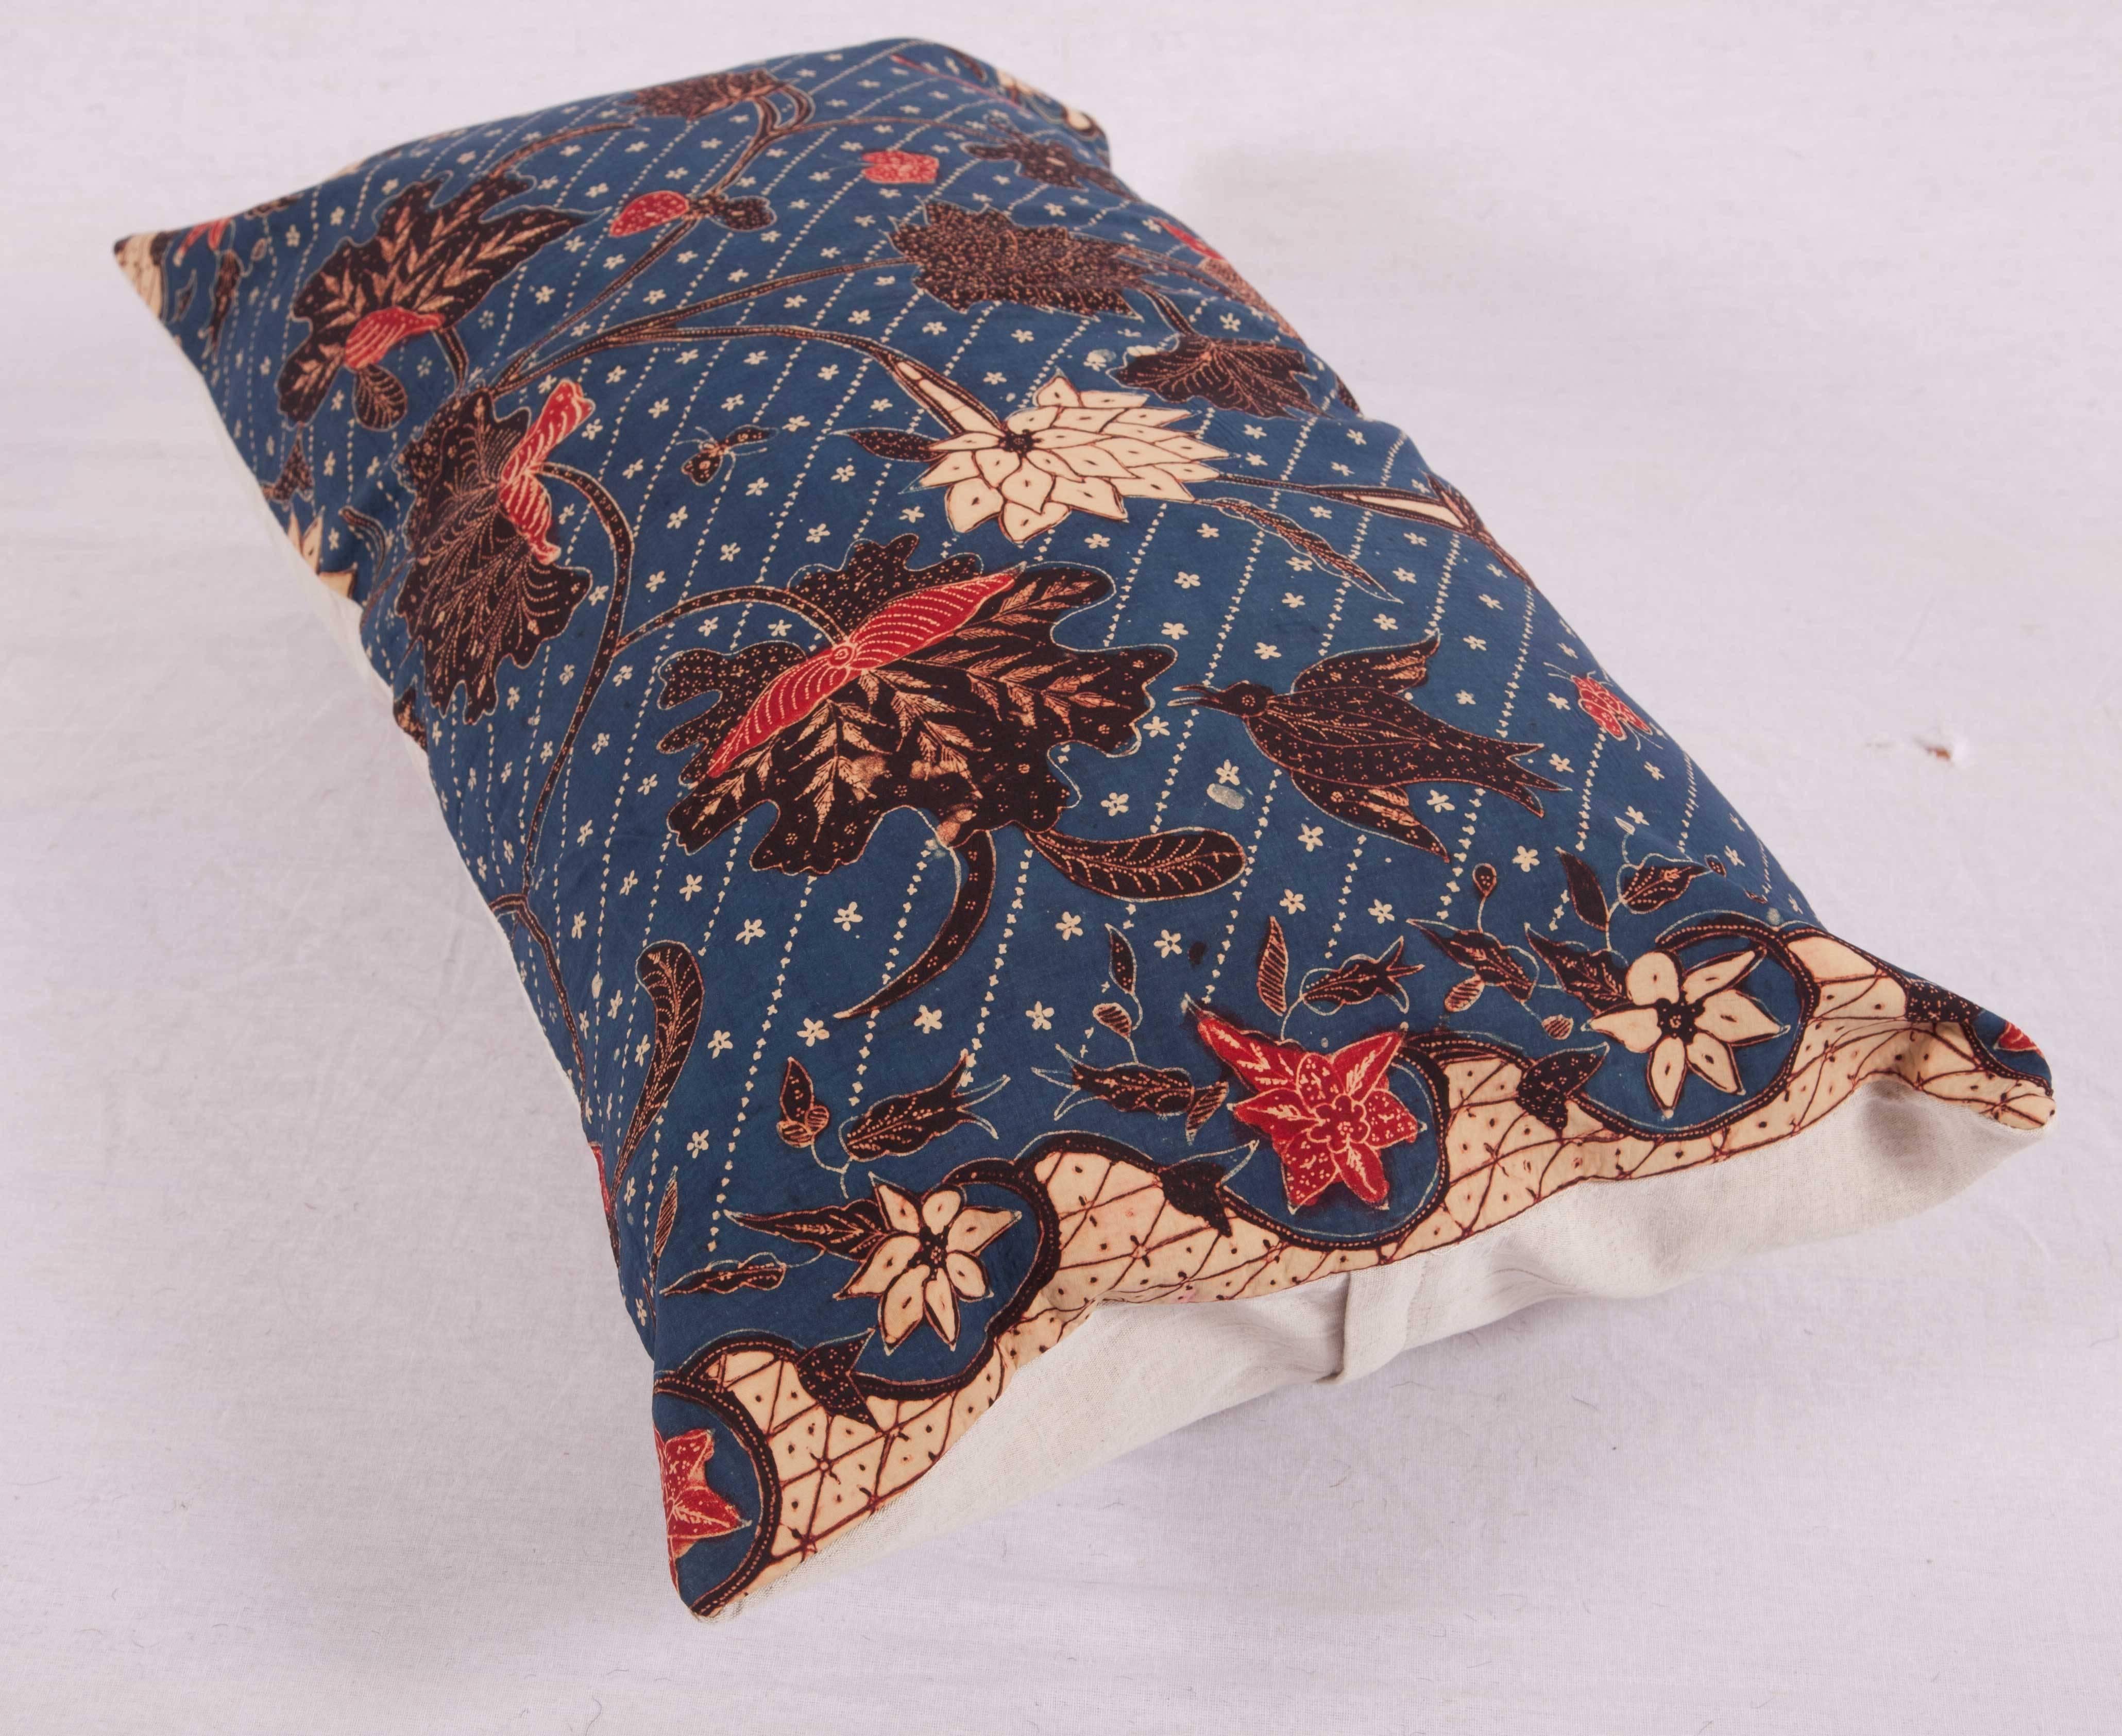 Cotton Batik Pillow Fashioned from an Early 20th Century Indonesian Batik Panel